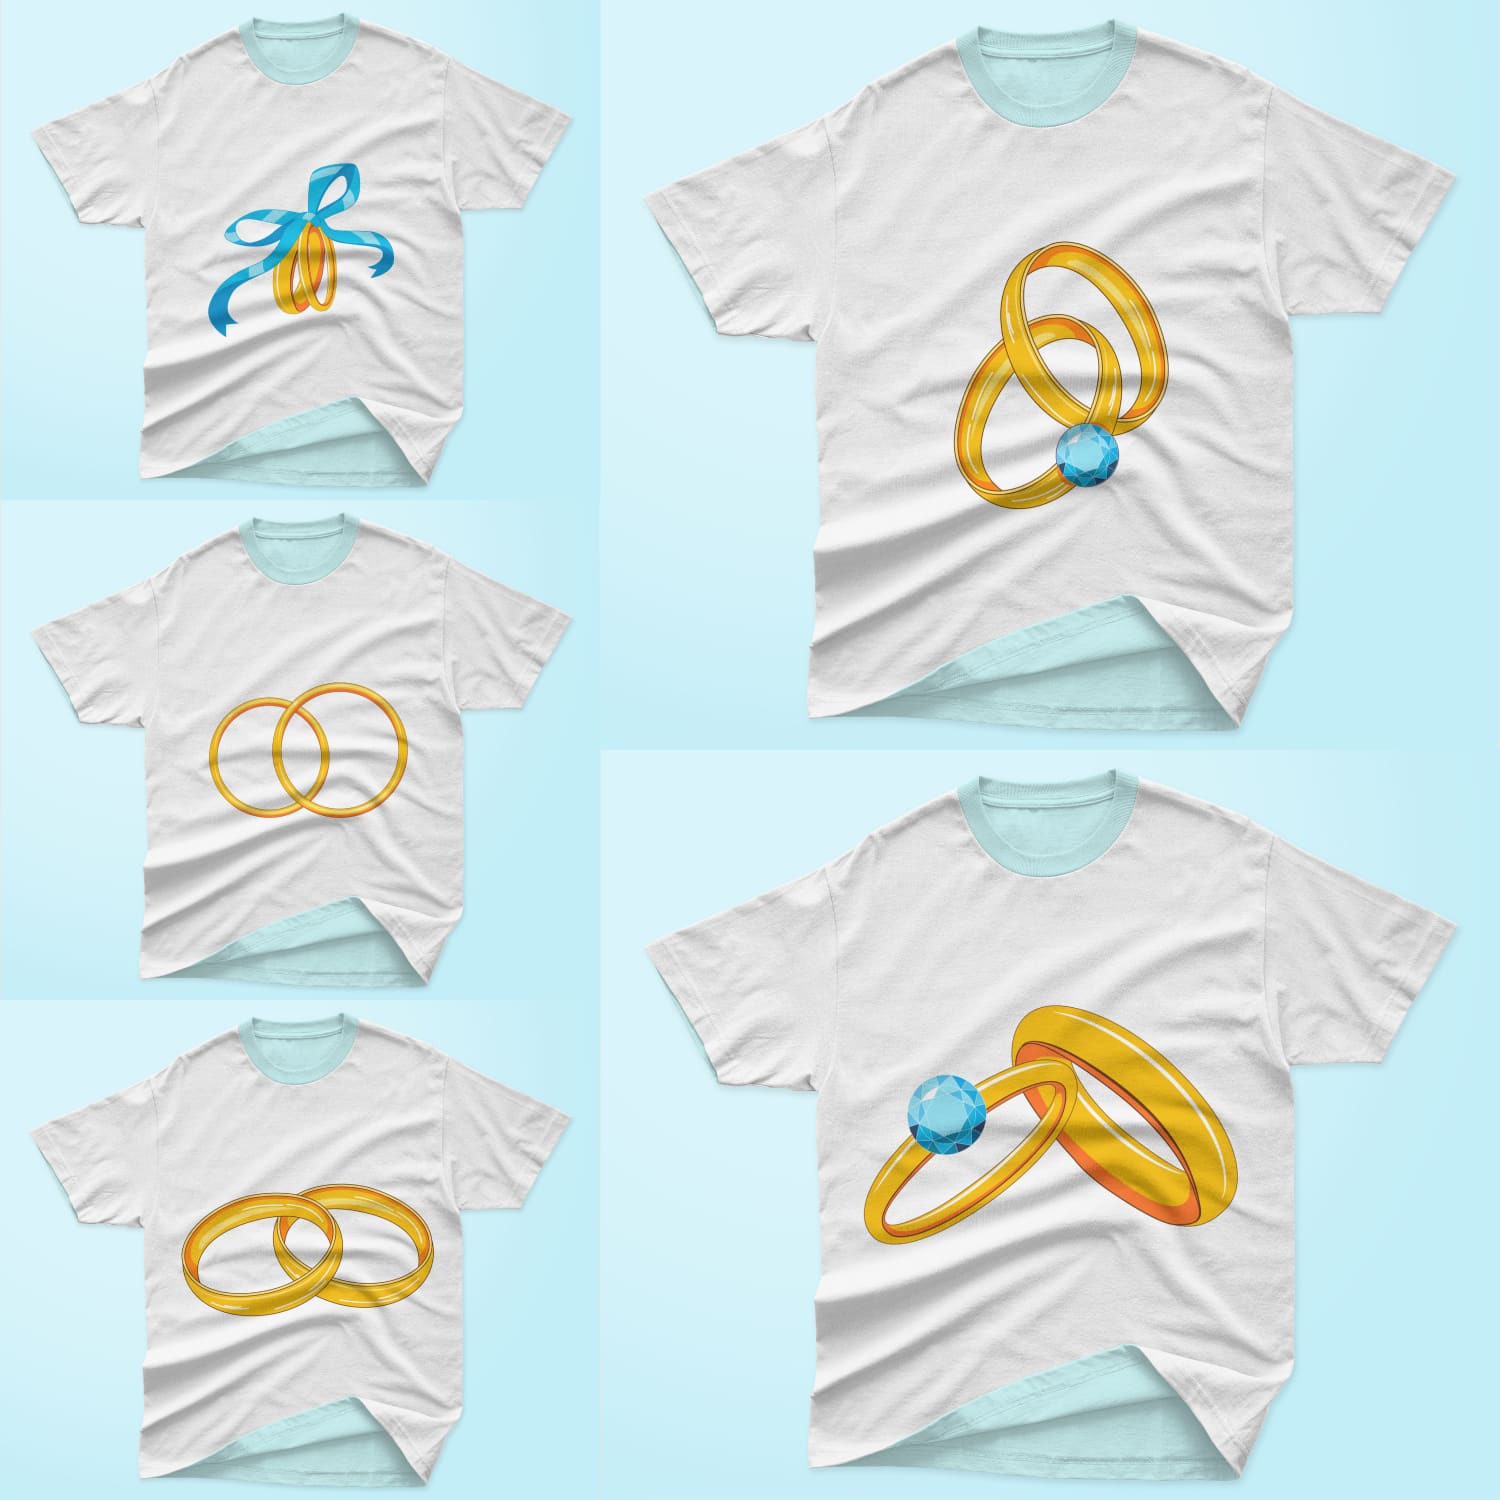 A selection of images of t-shirts with amazing prints of wedding rings.